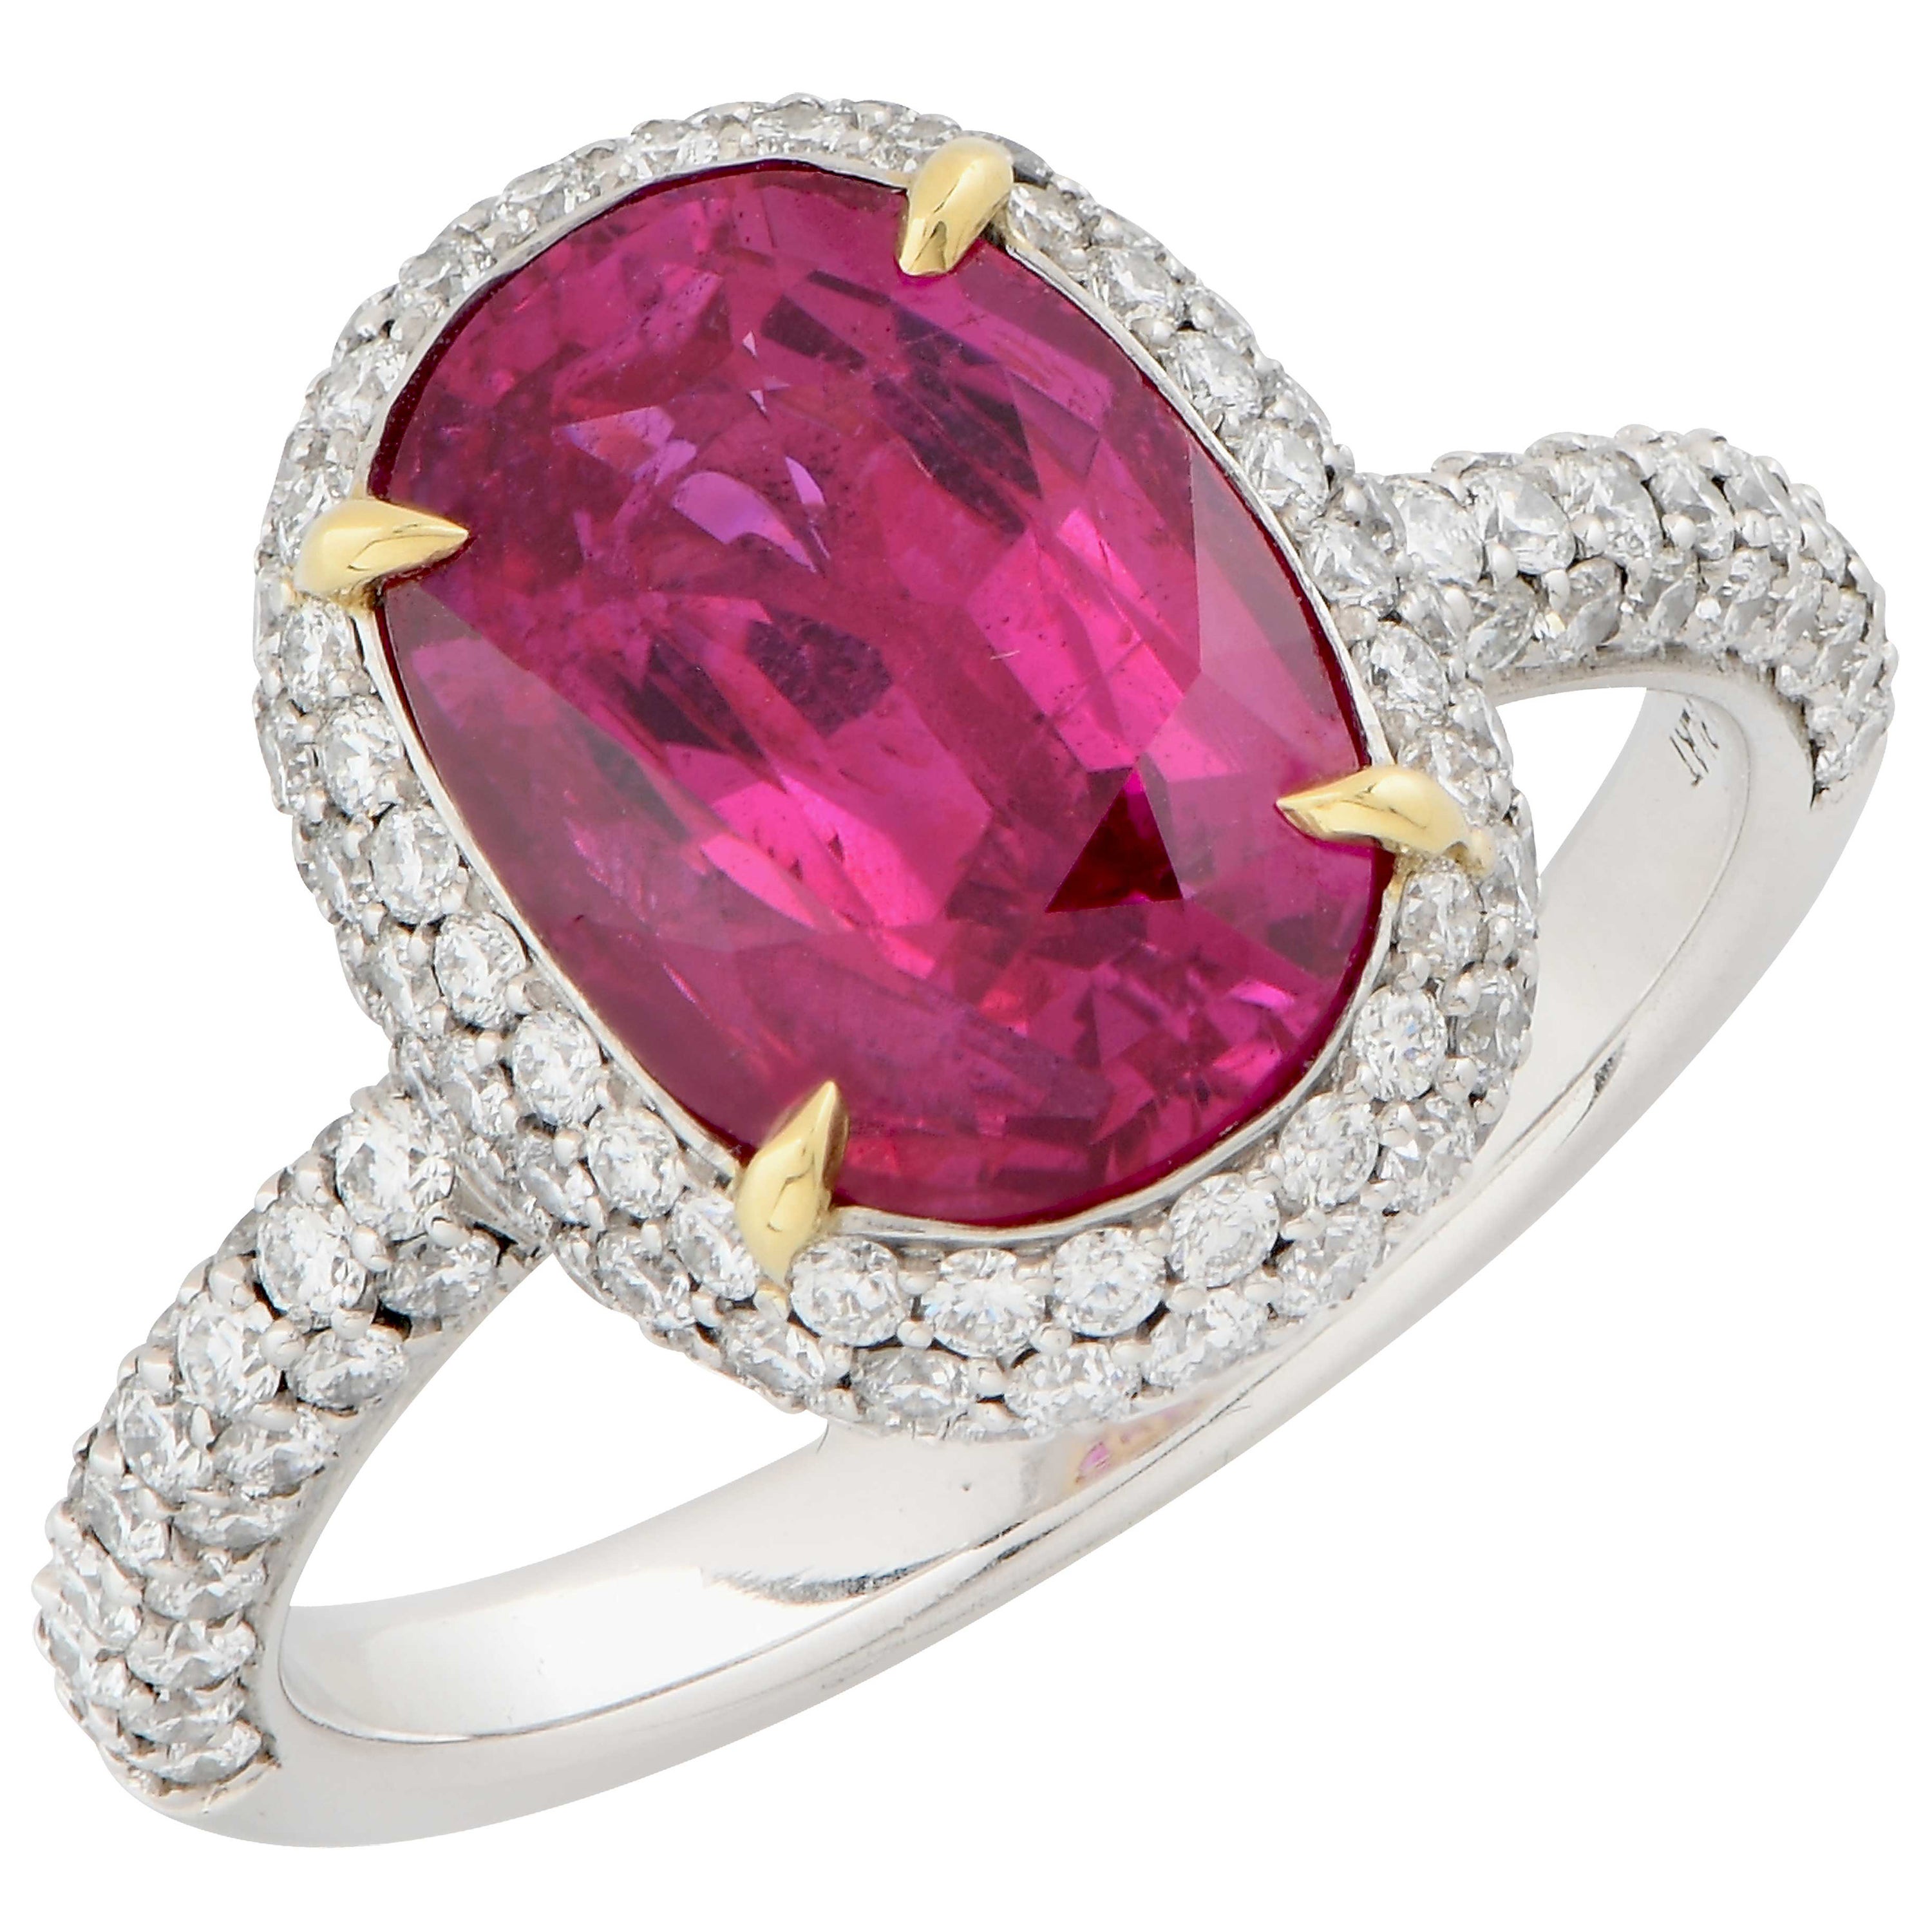 Burma Ruby AGL Graded No Heat 3.7 Carats Platinum and Diamond Ring For Sale